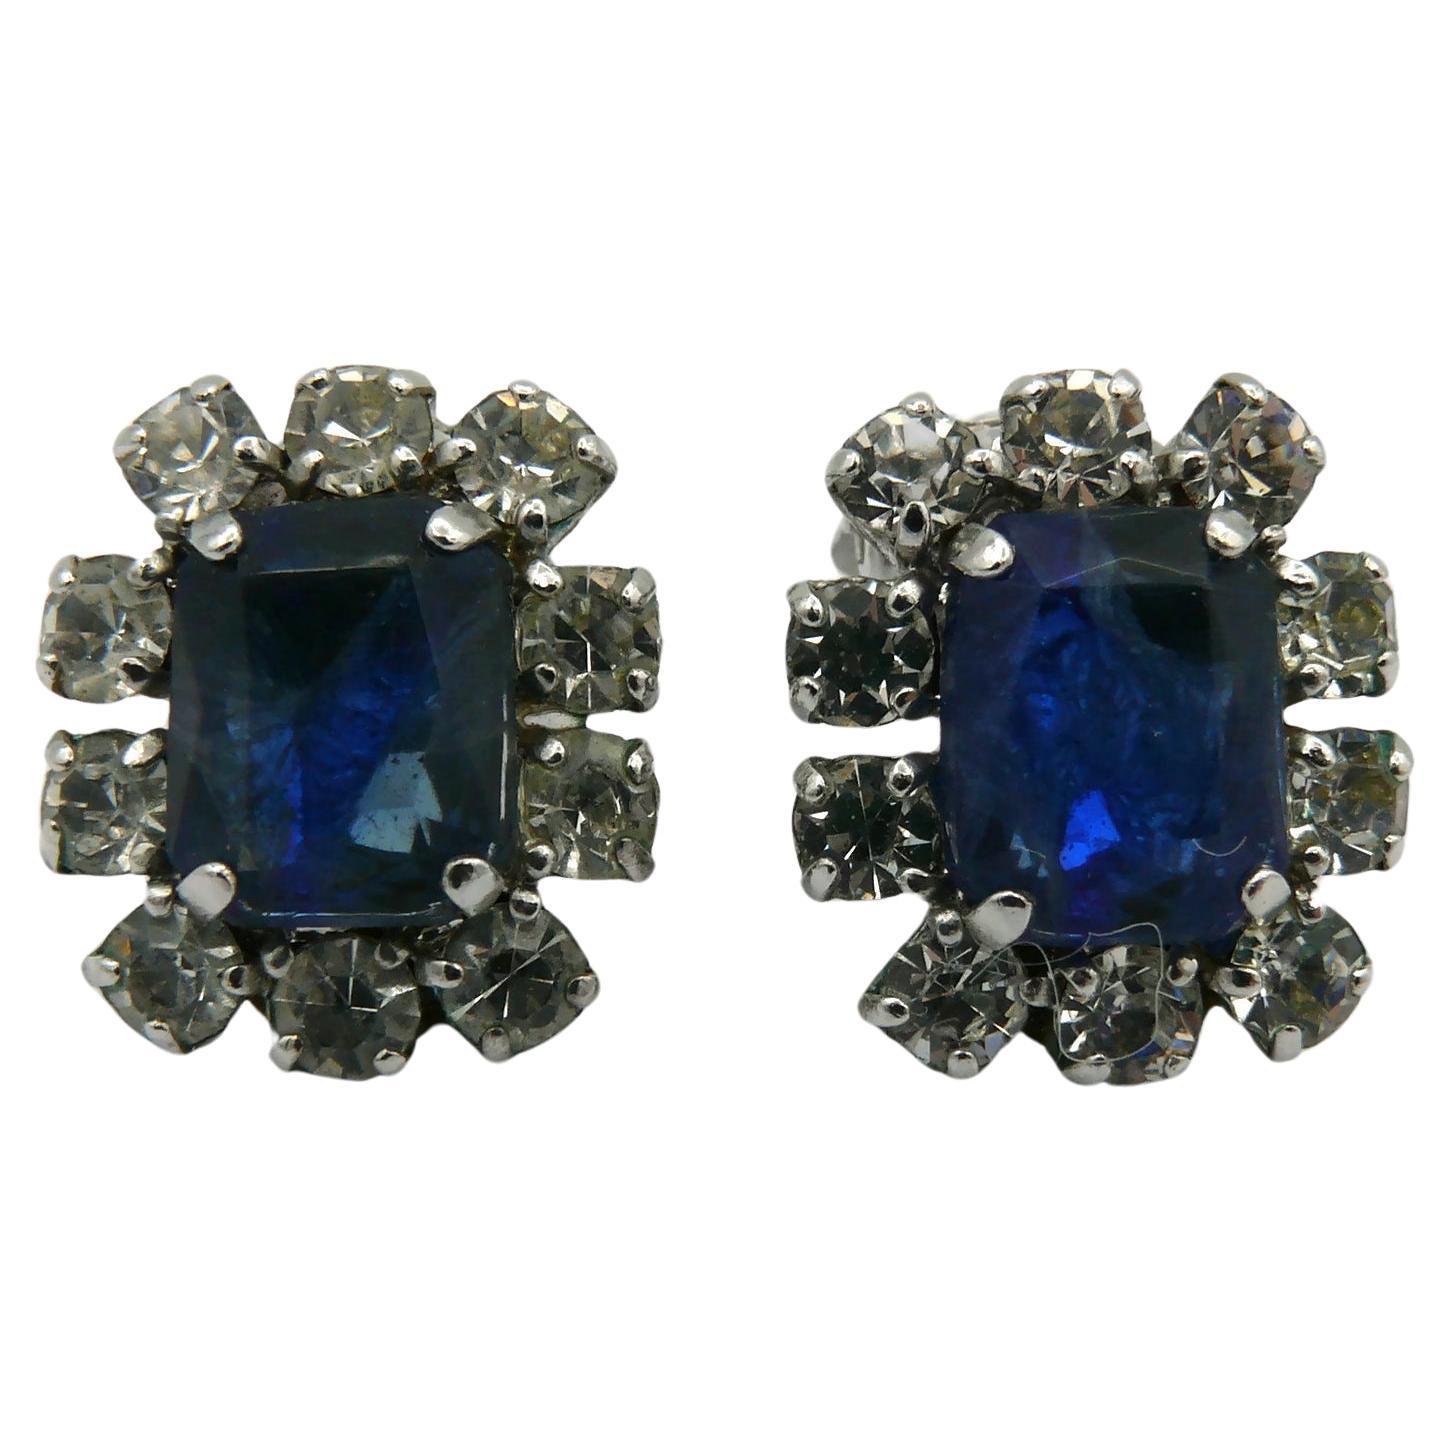 CHRISTIAN DIOR Vintage Jewelled Clip-On Earrings, 1970 For Sale